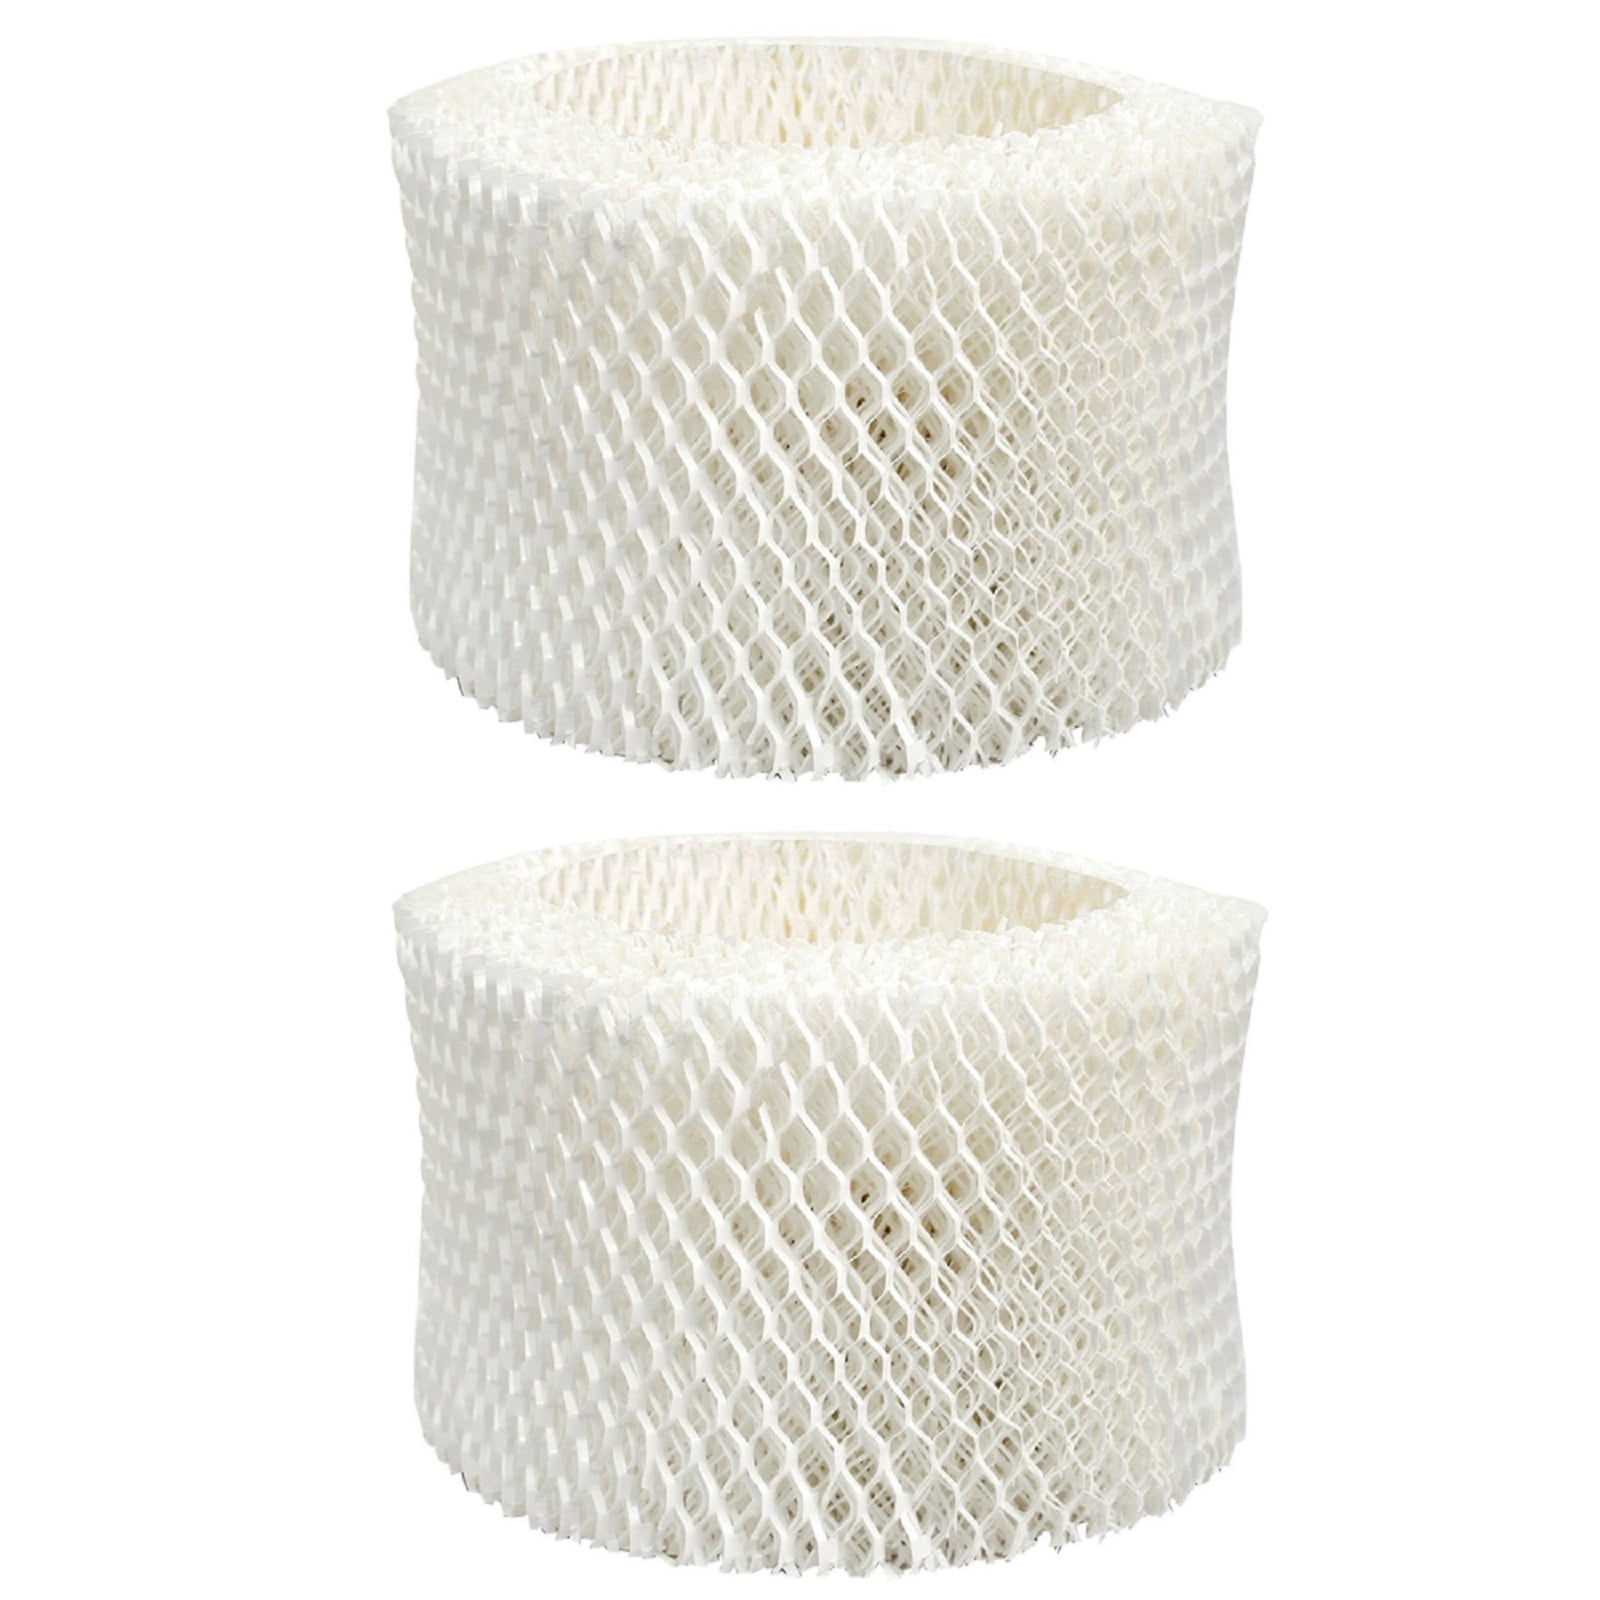 For Honeywell HAC-500 HCM-350 HCM-600 HCM-630 Humidifier Filter Spare Fitting 